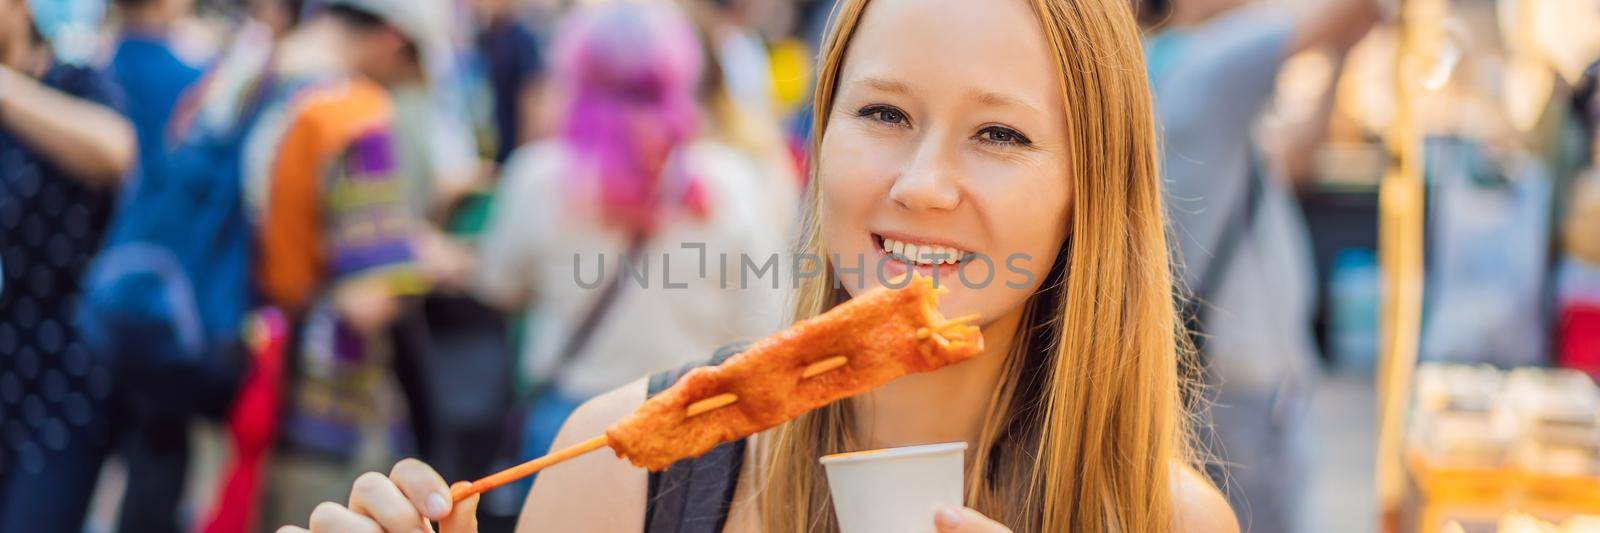 Young woman tourist eating Typical Korean street food on a walking street of Seoul. Spicy fast food simply found at local Korean martket, Soul Korea. BANNER, LONG FORMAT